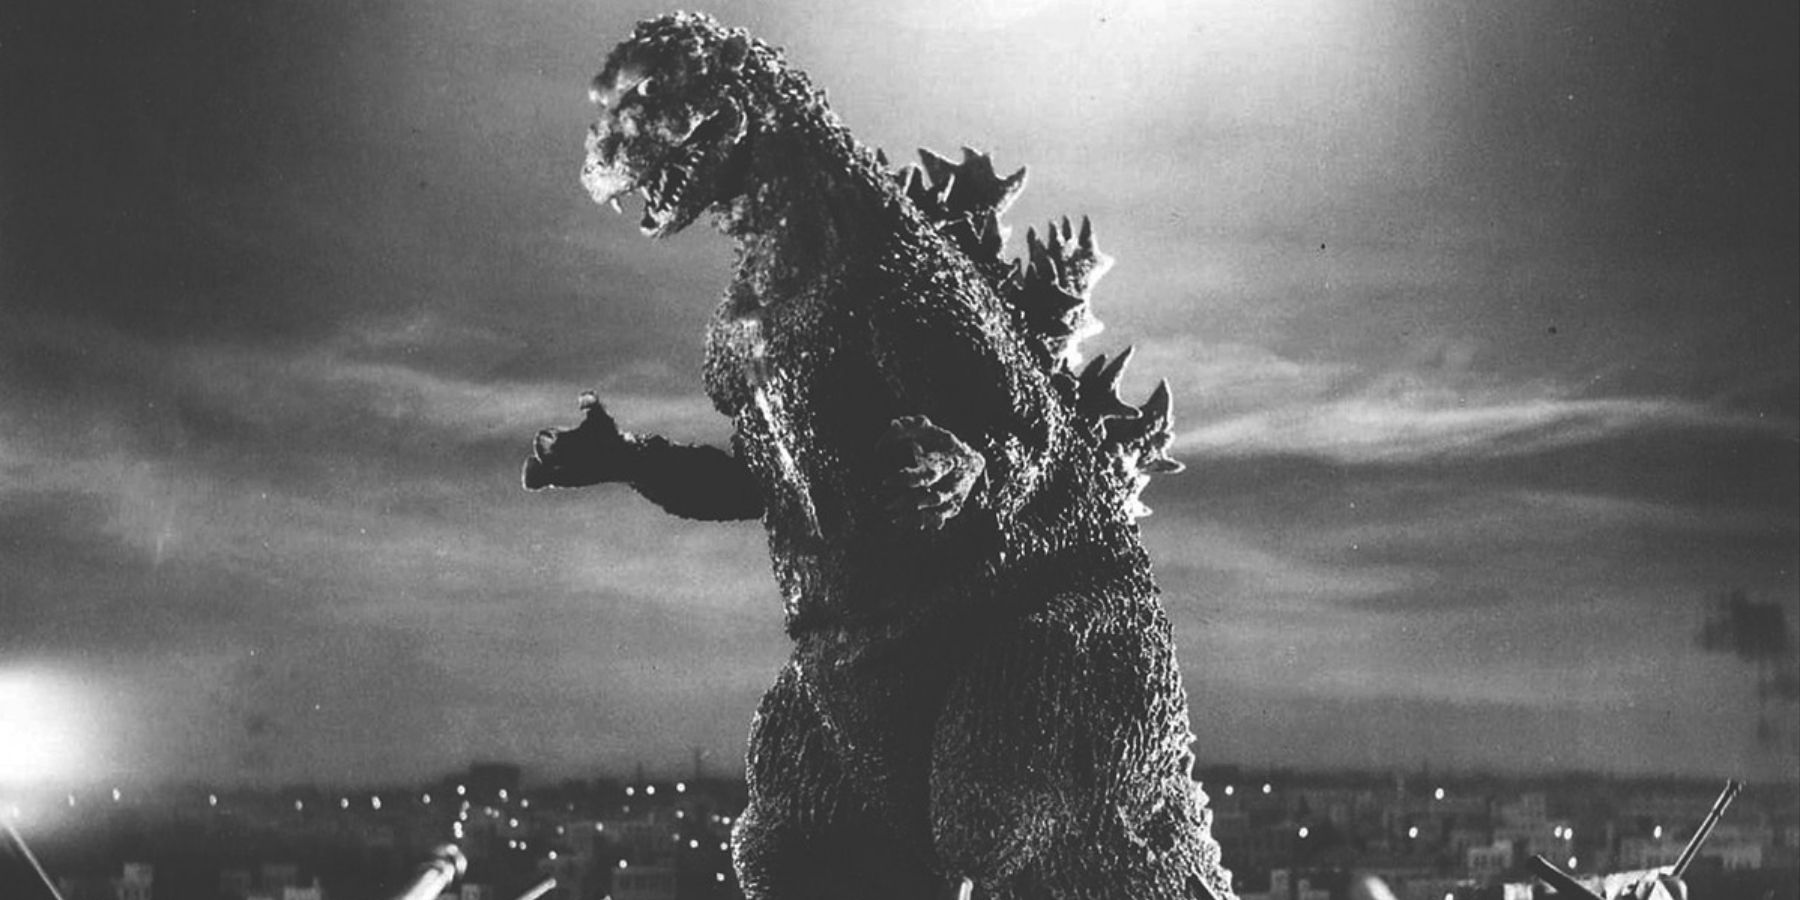 A black and white shot of Godzilla from the 1954 movie.